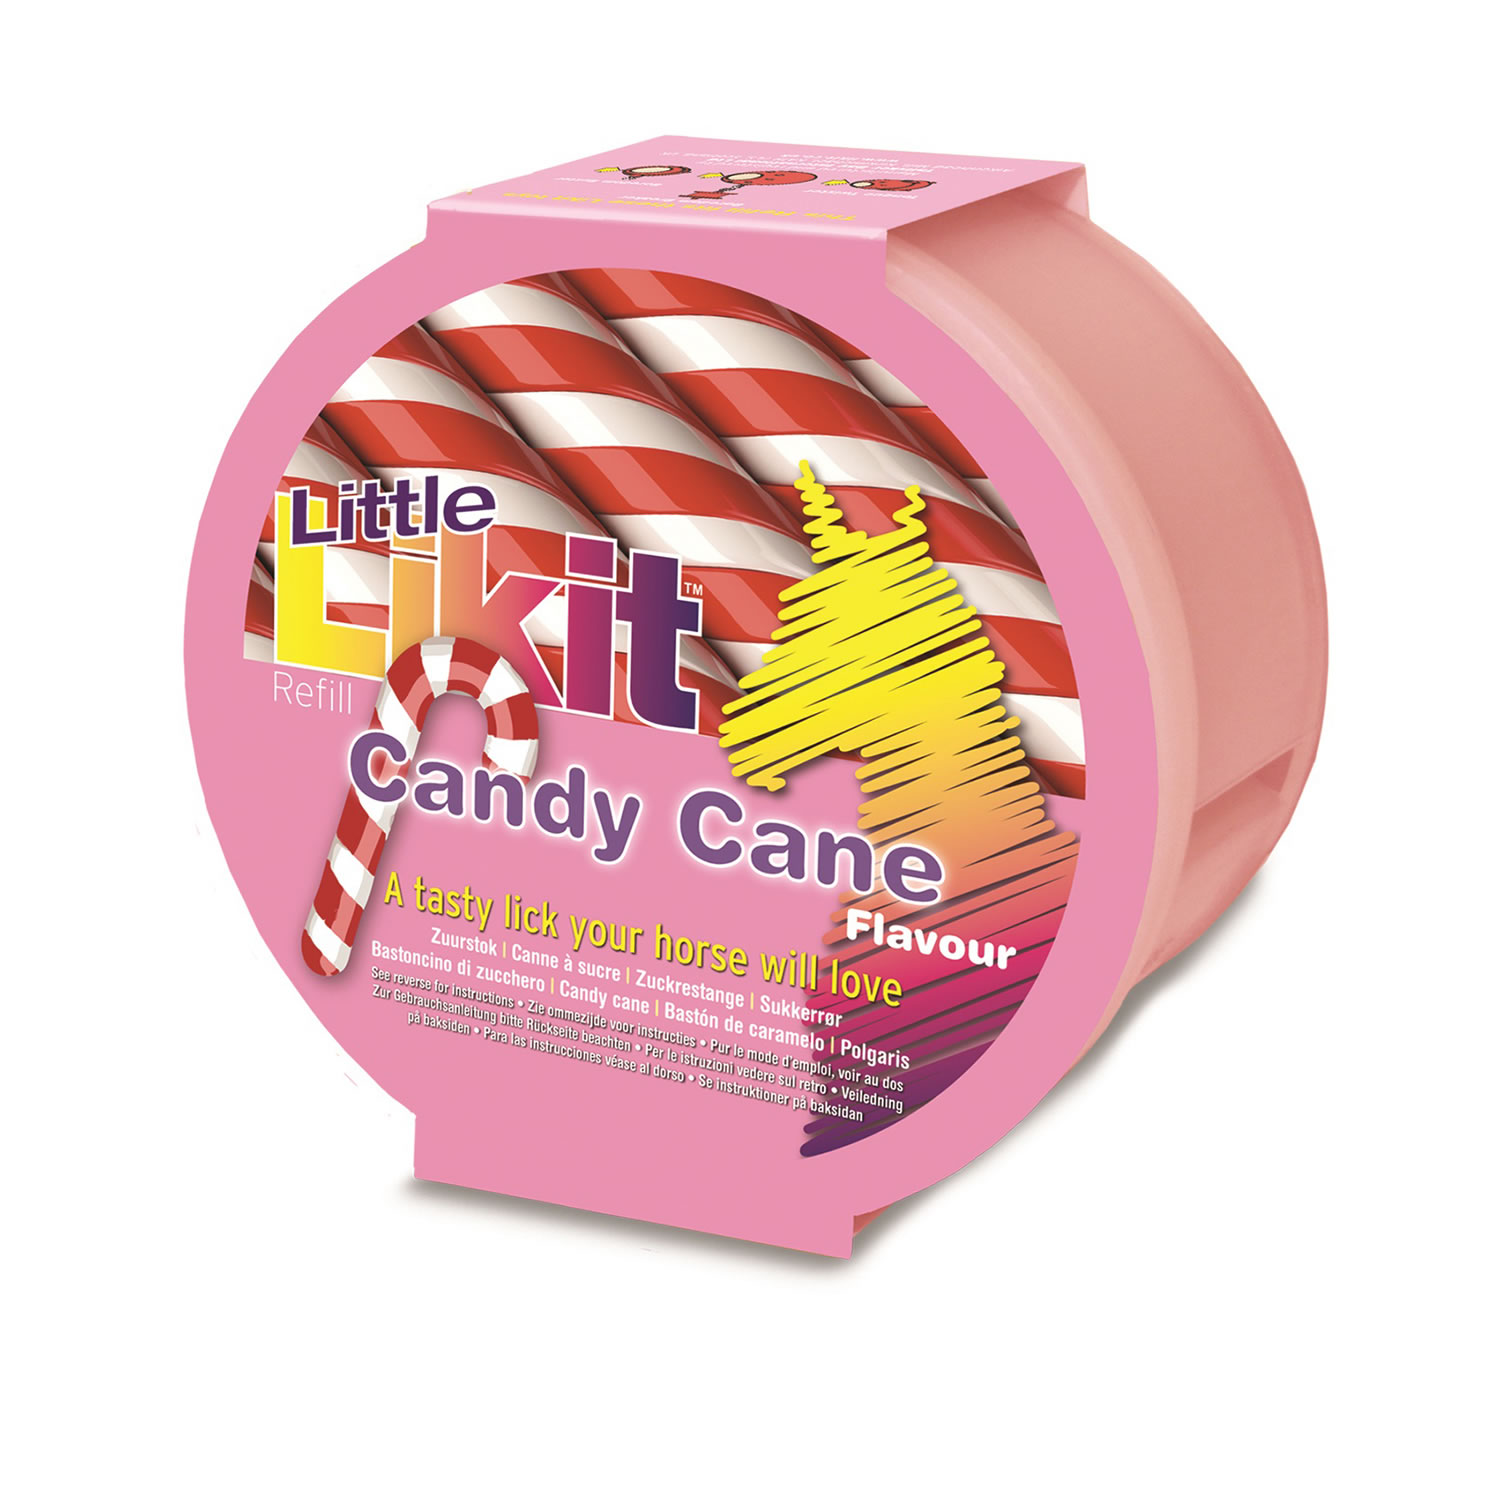 LITTLE LIKIT 24 PACK CANDY CANE X 24 PACK 24 PACK CANDY CANE